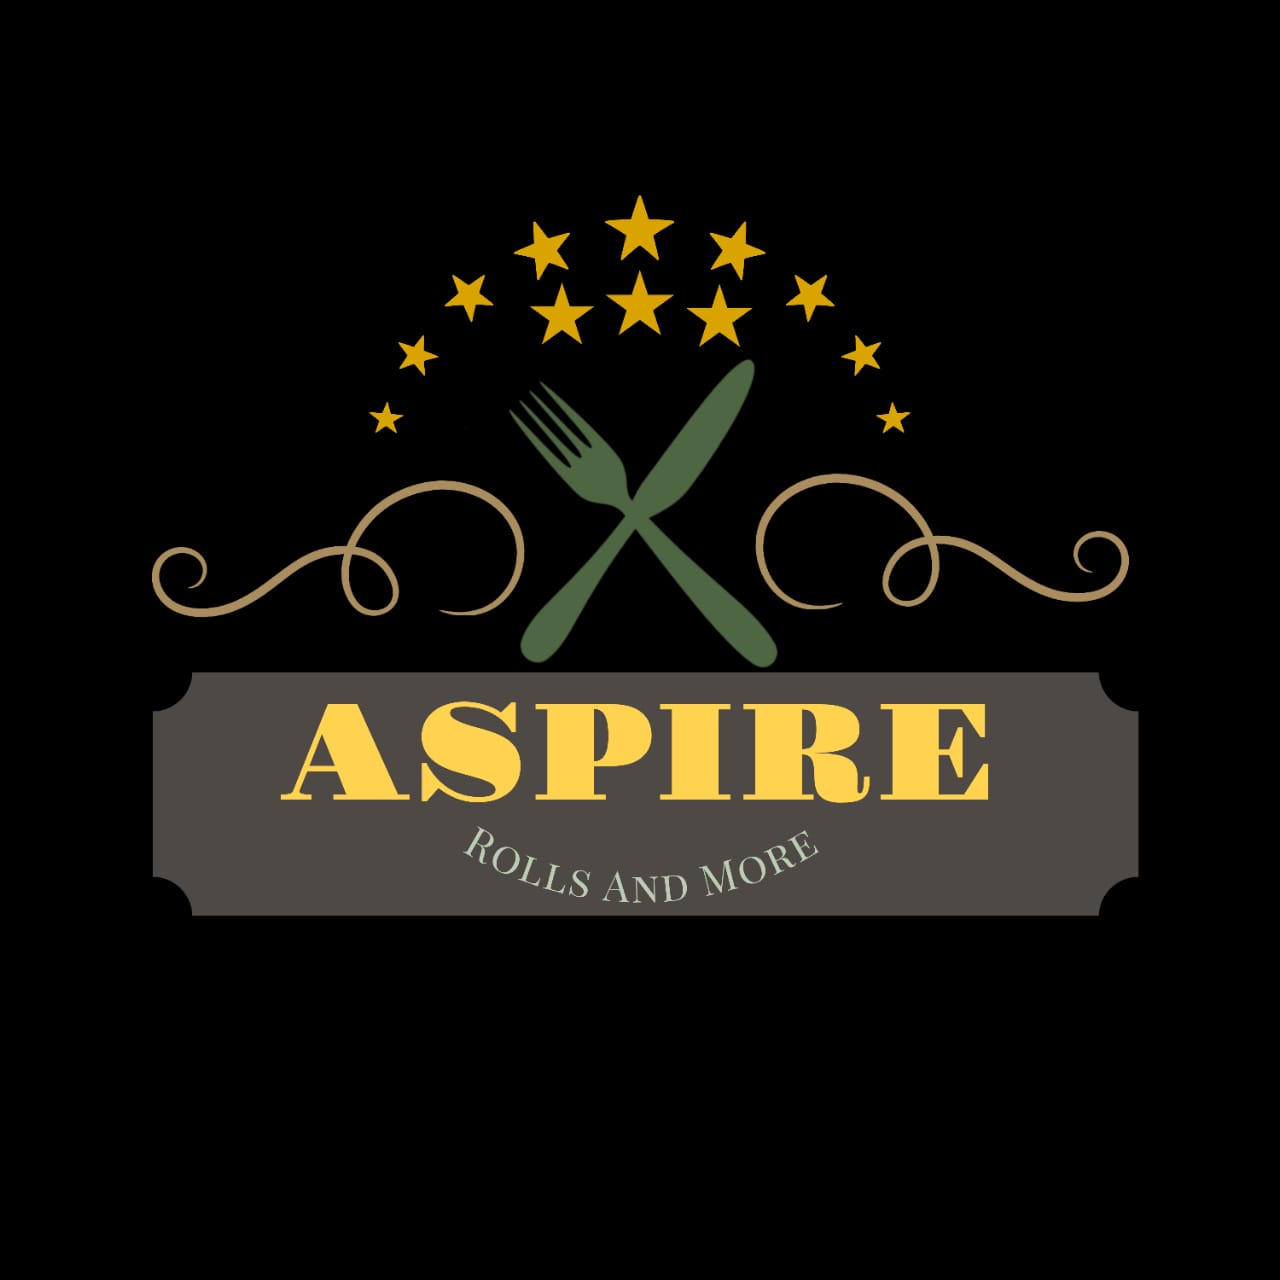 Aspire roll and more